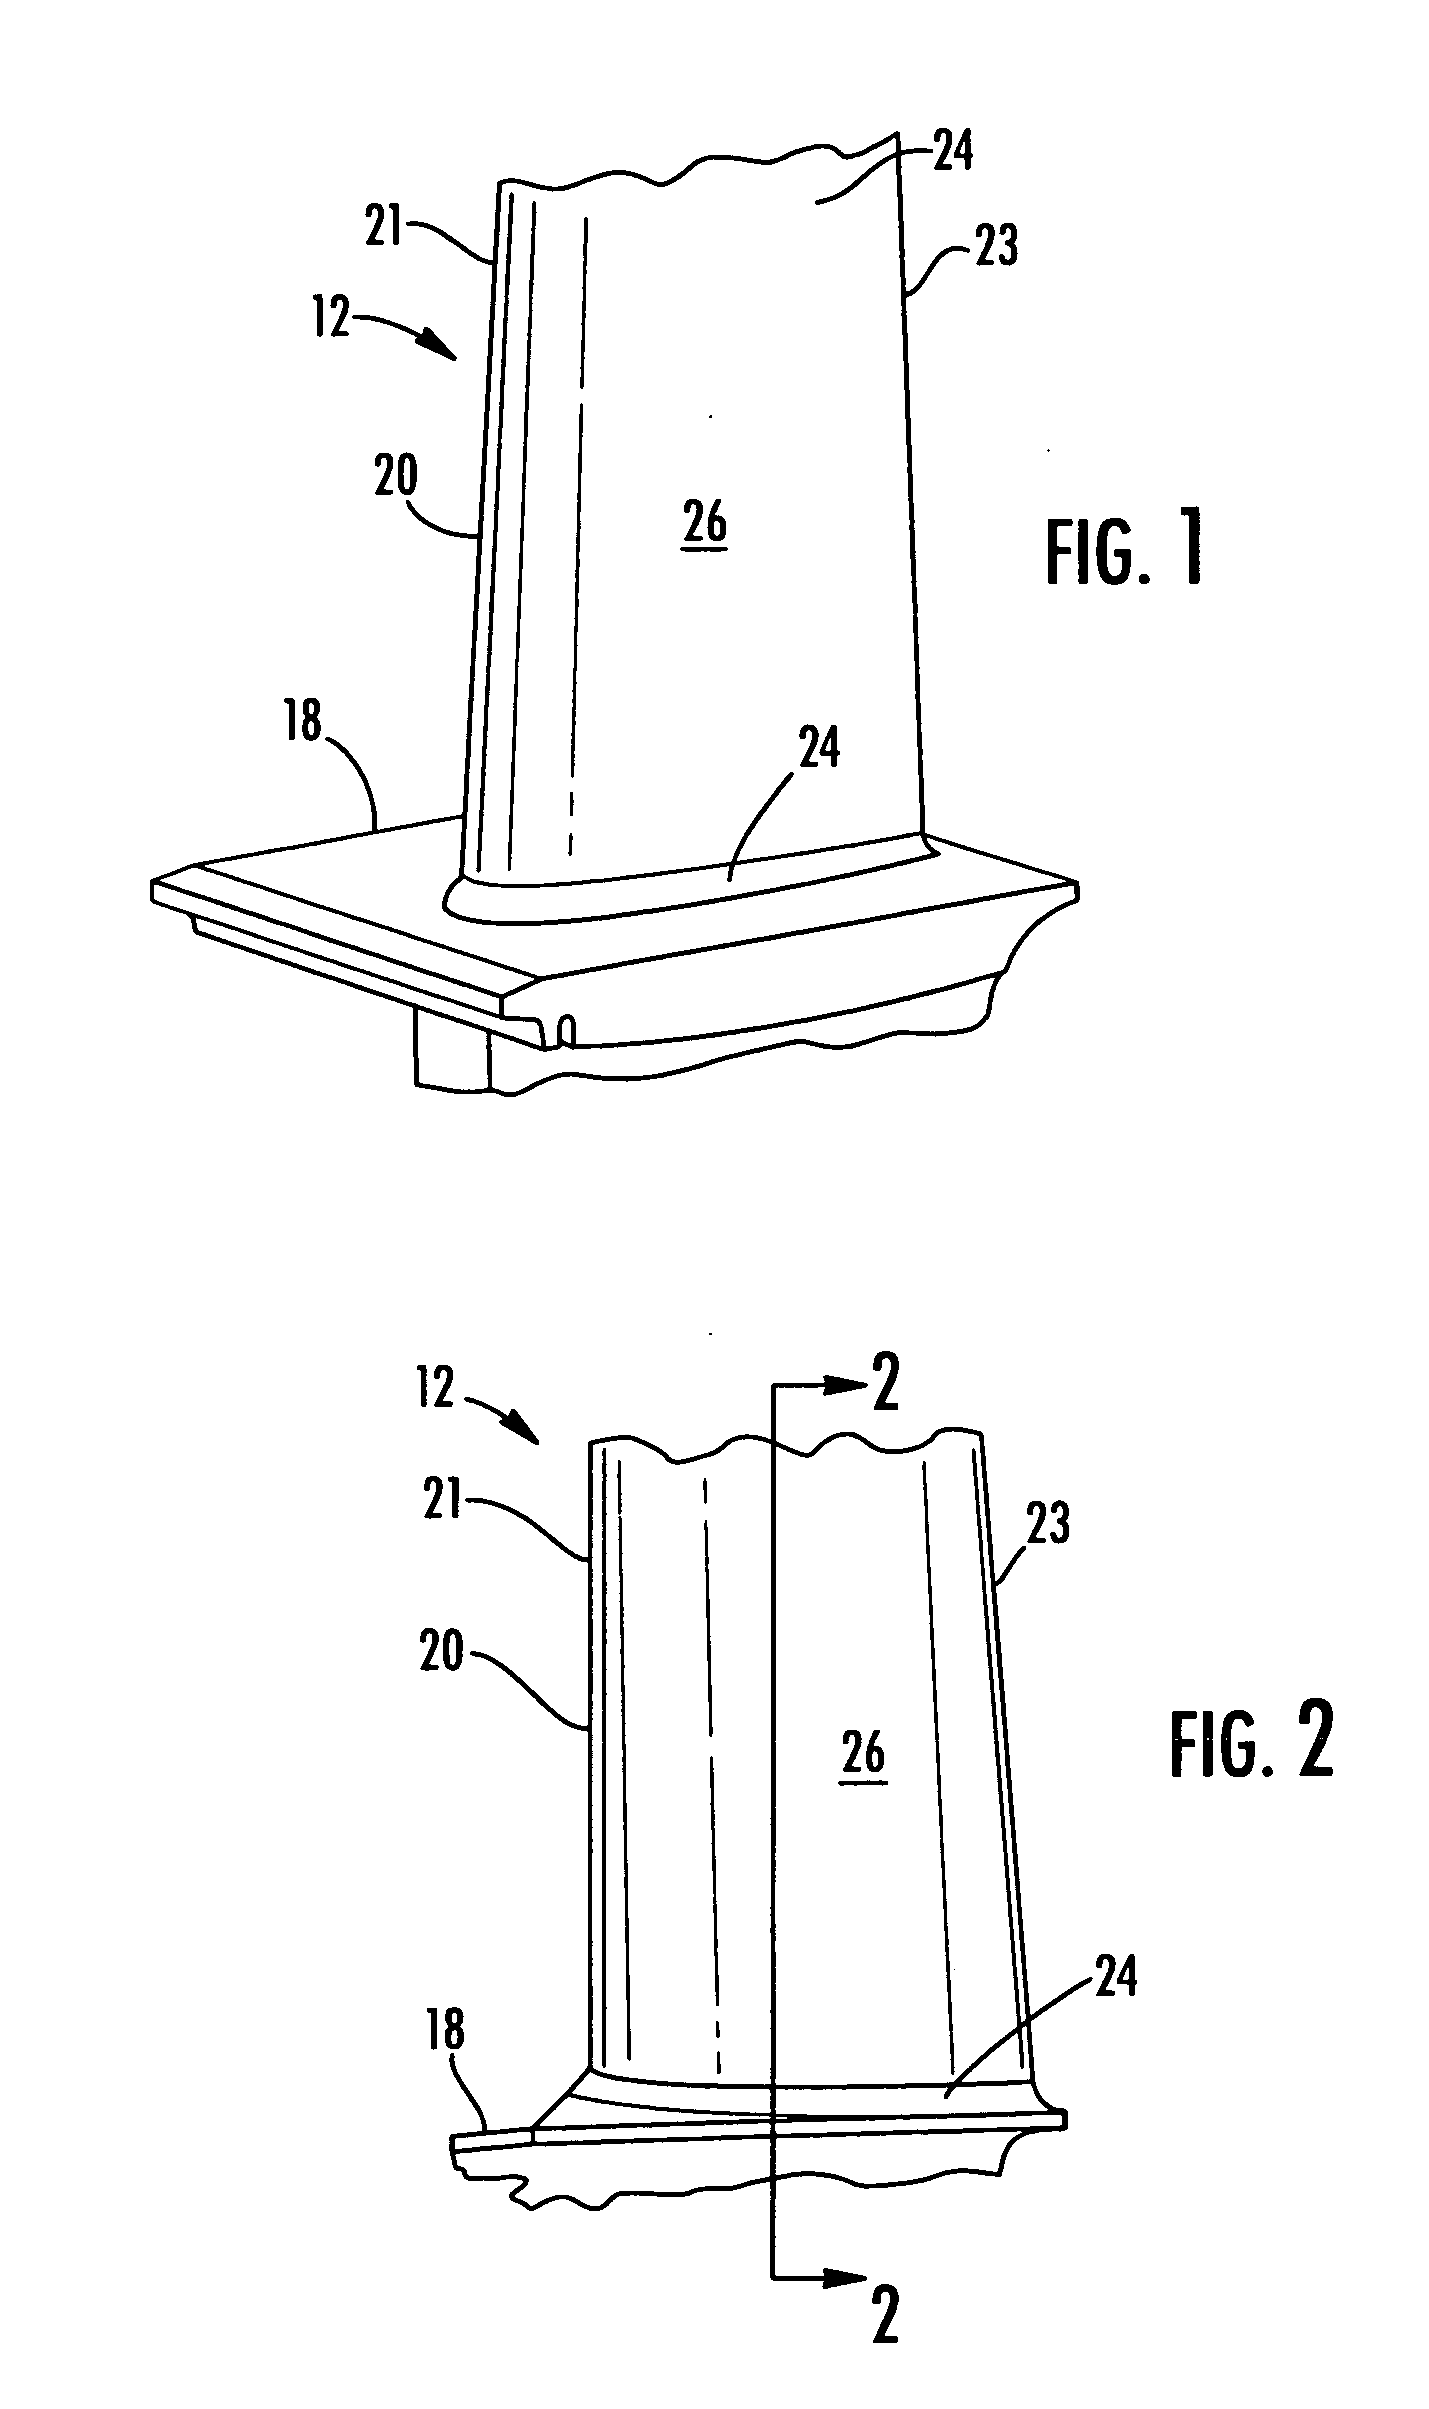 Advanced cooling method for combustion turbine airfoil fillets